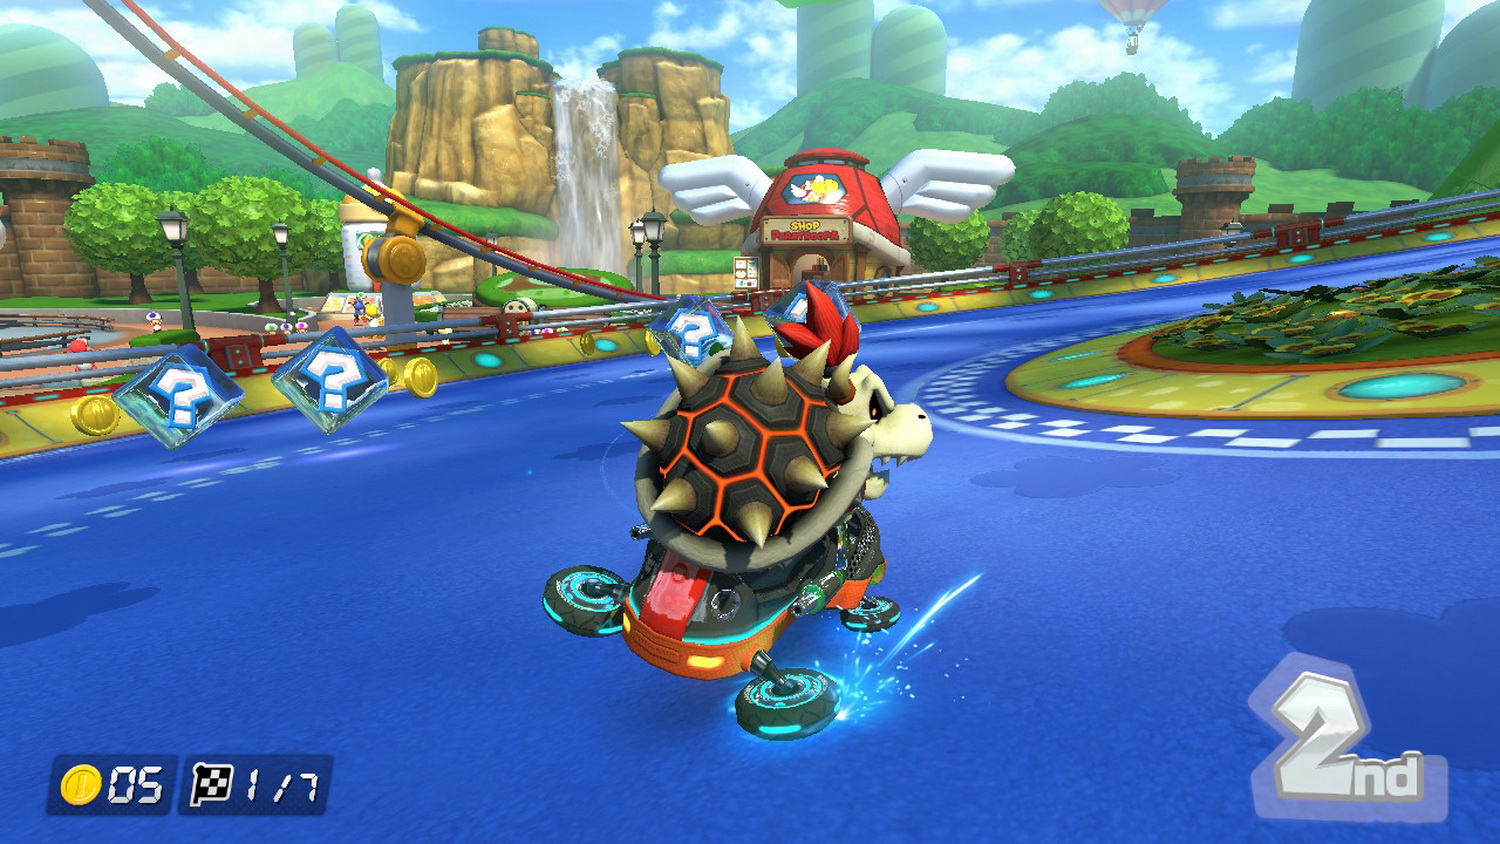 Mario Kart 8 Gets More Characters Because It'll Never Die